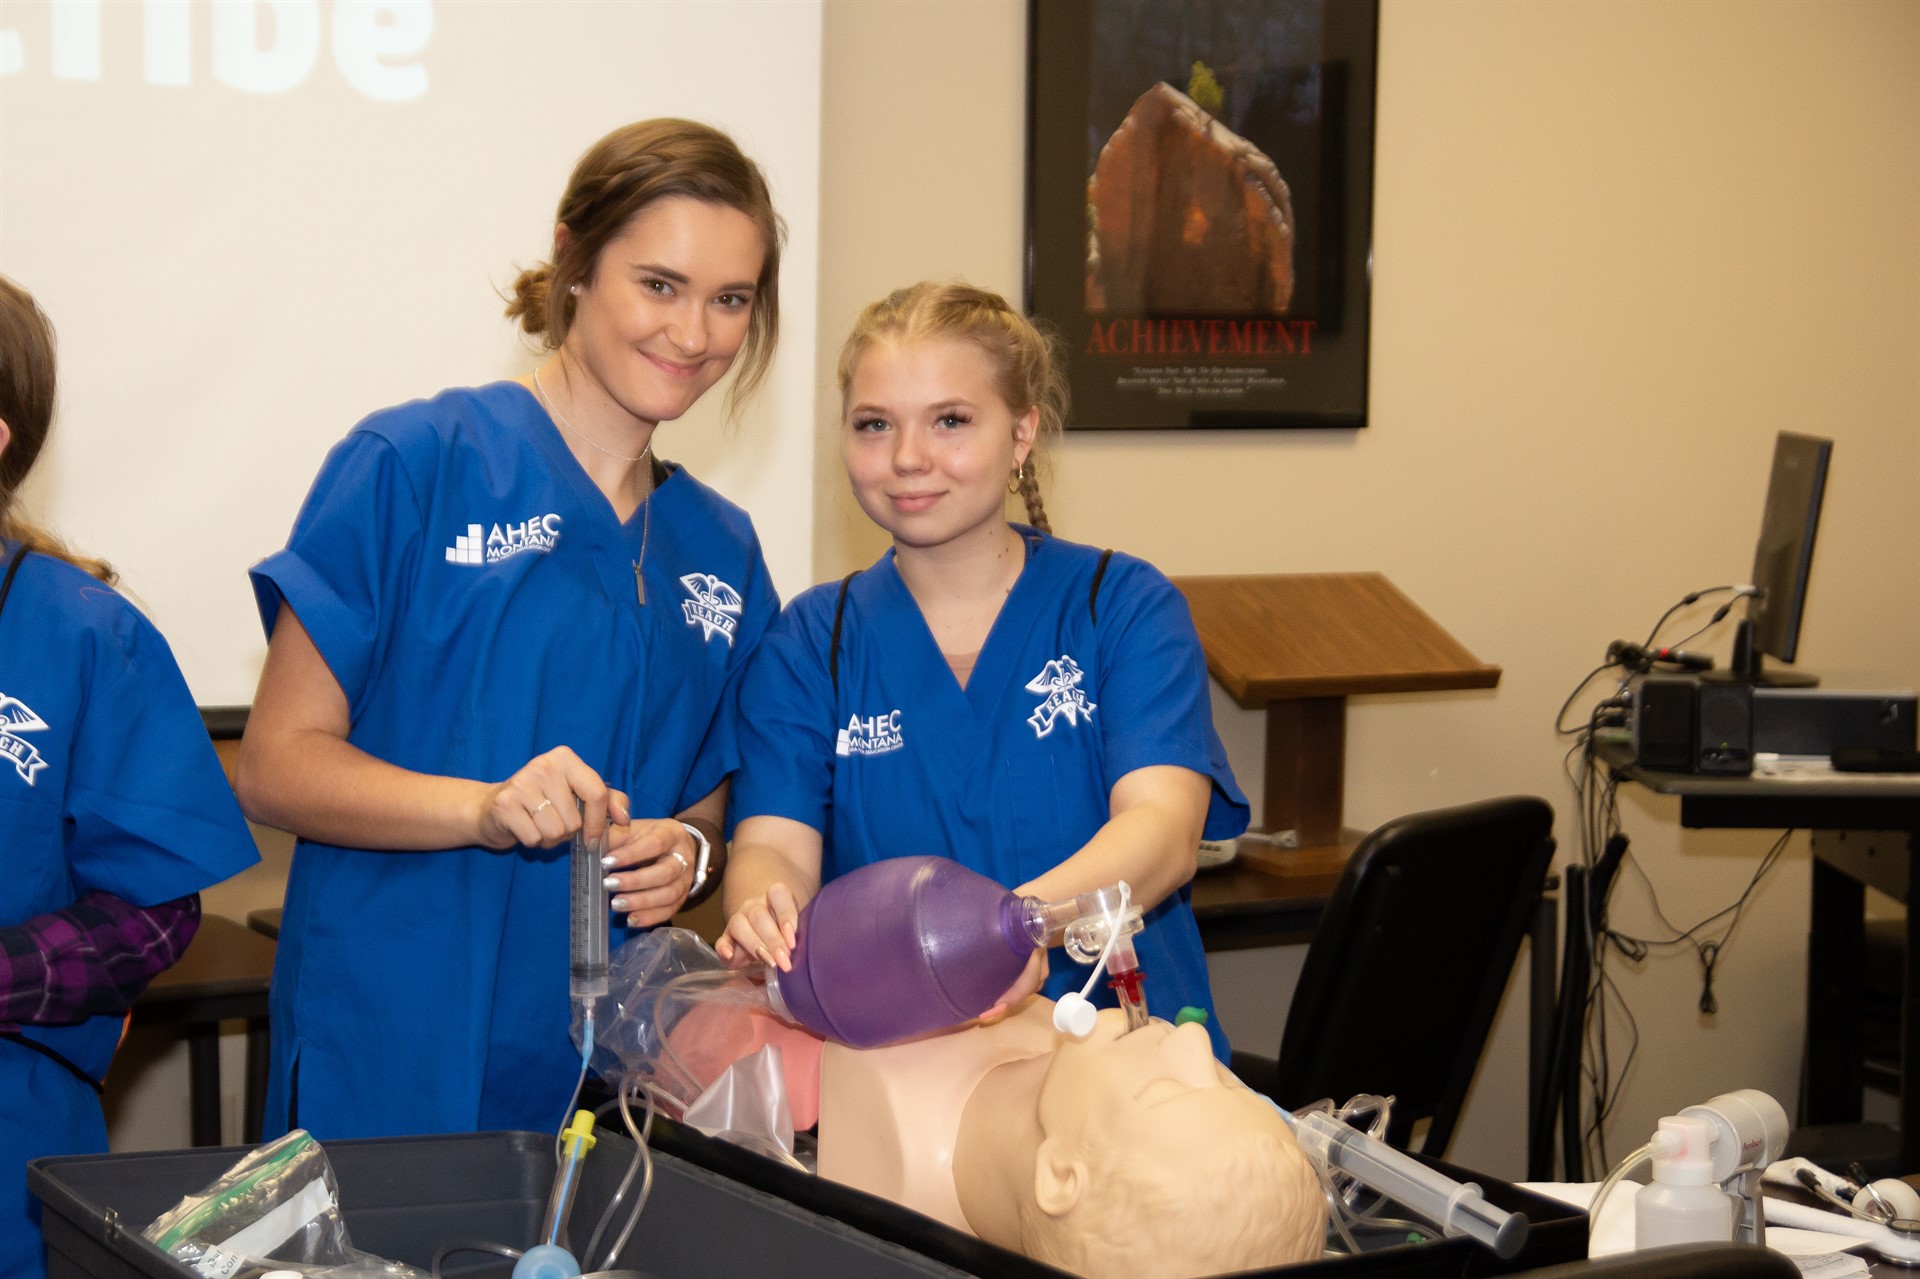 Student Healthcare Career Exploration Day